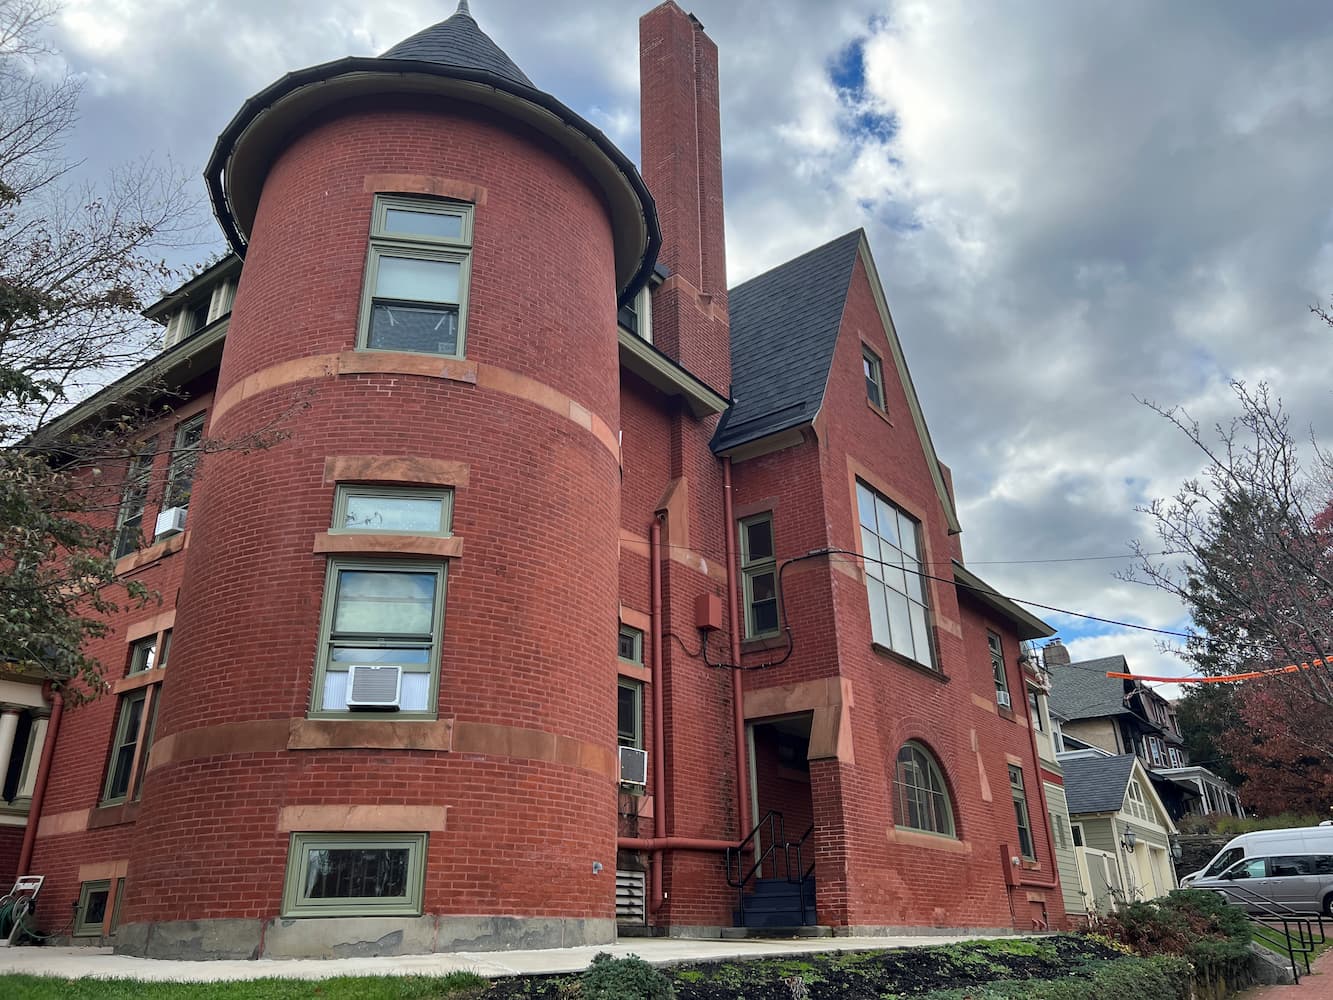 Red brick historic building featuring turret that has all new Pella wood windows